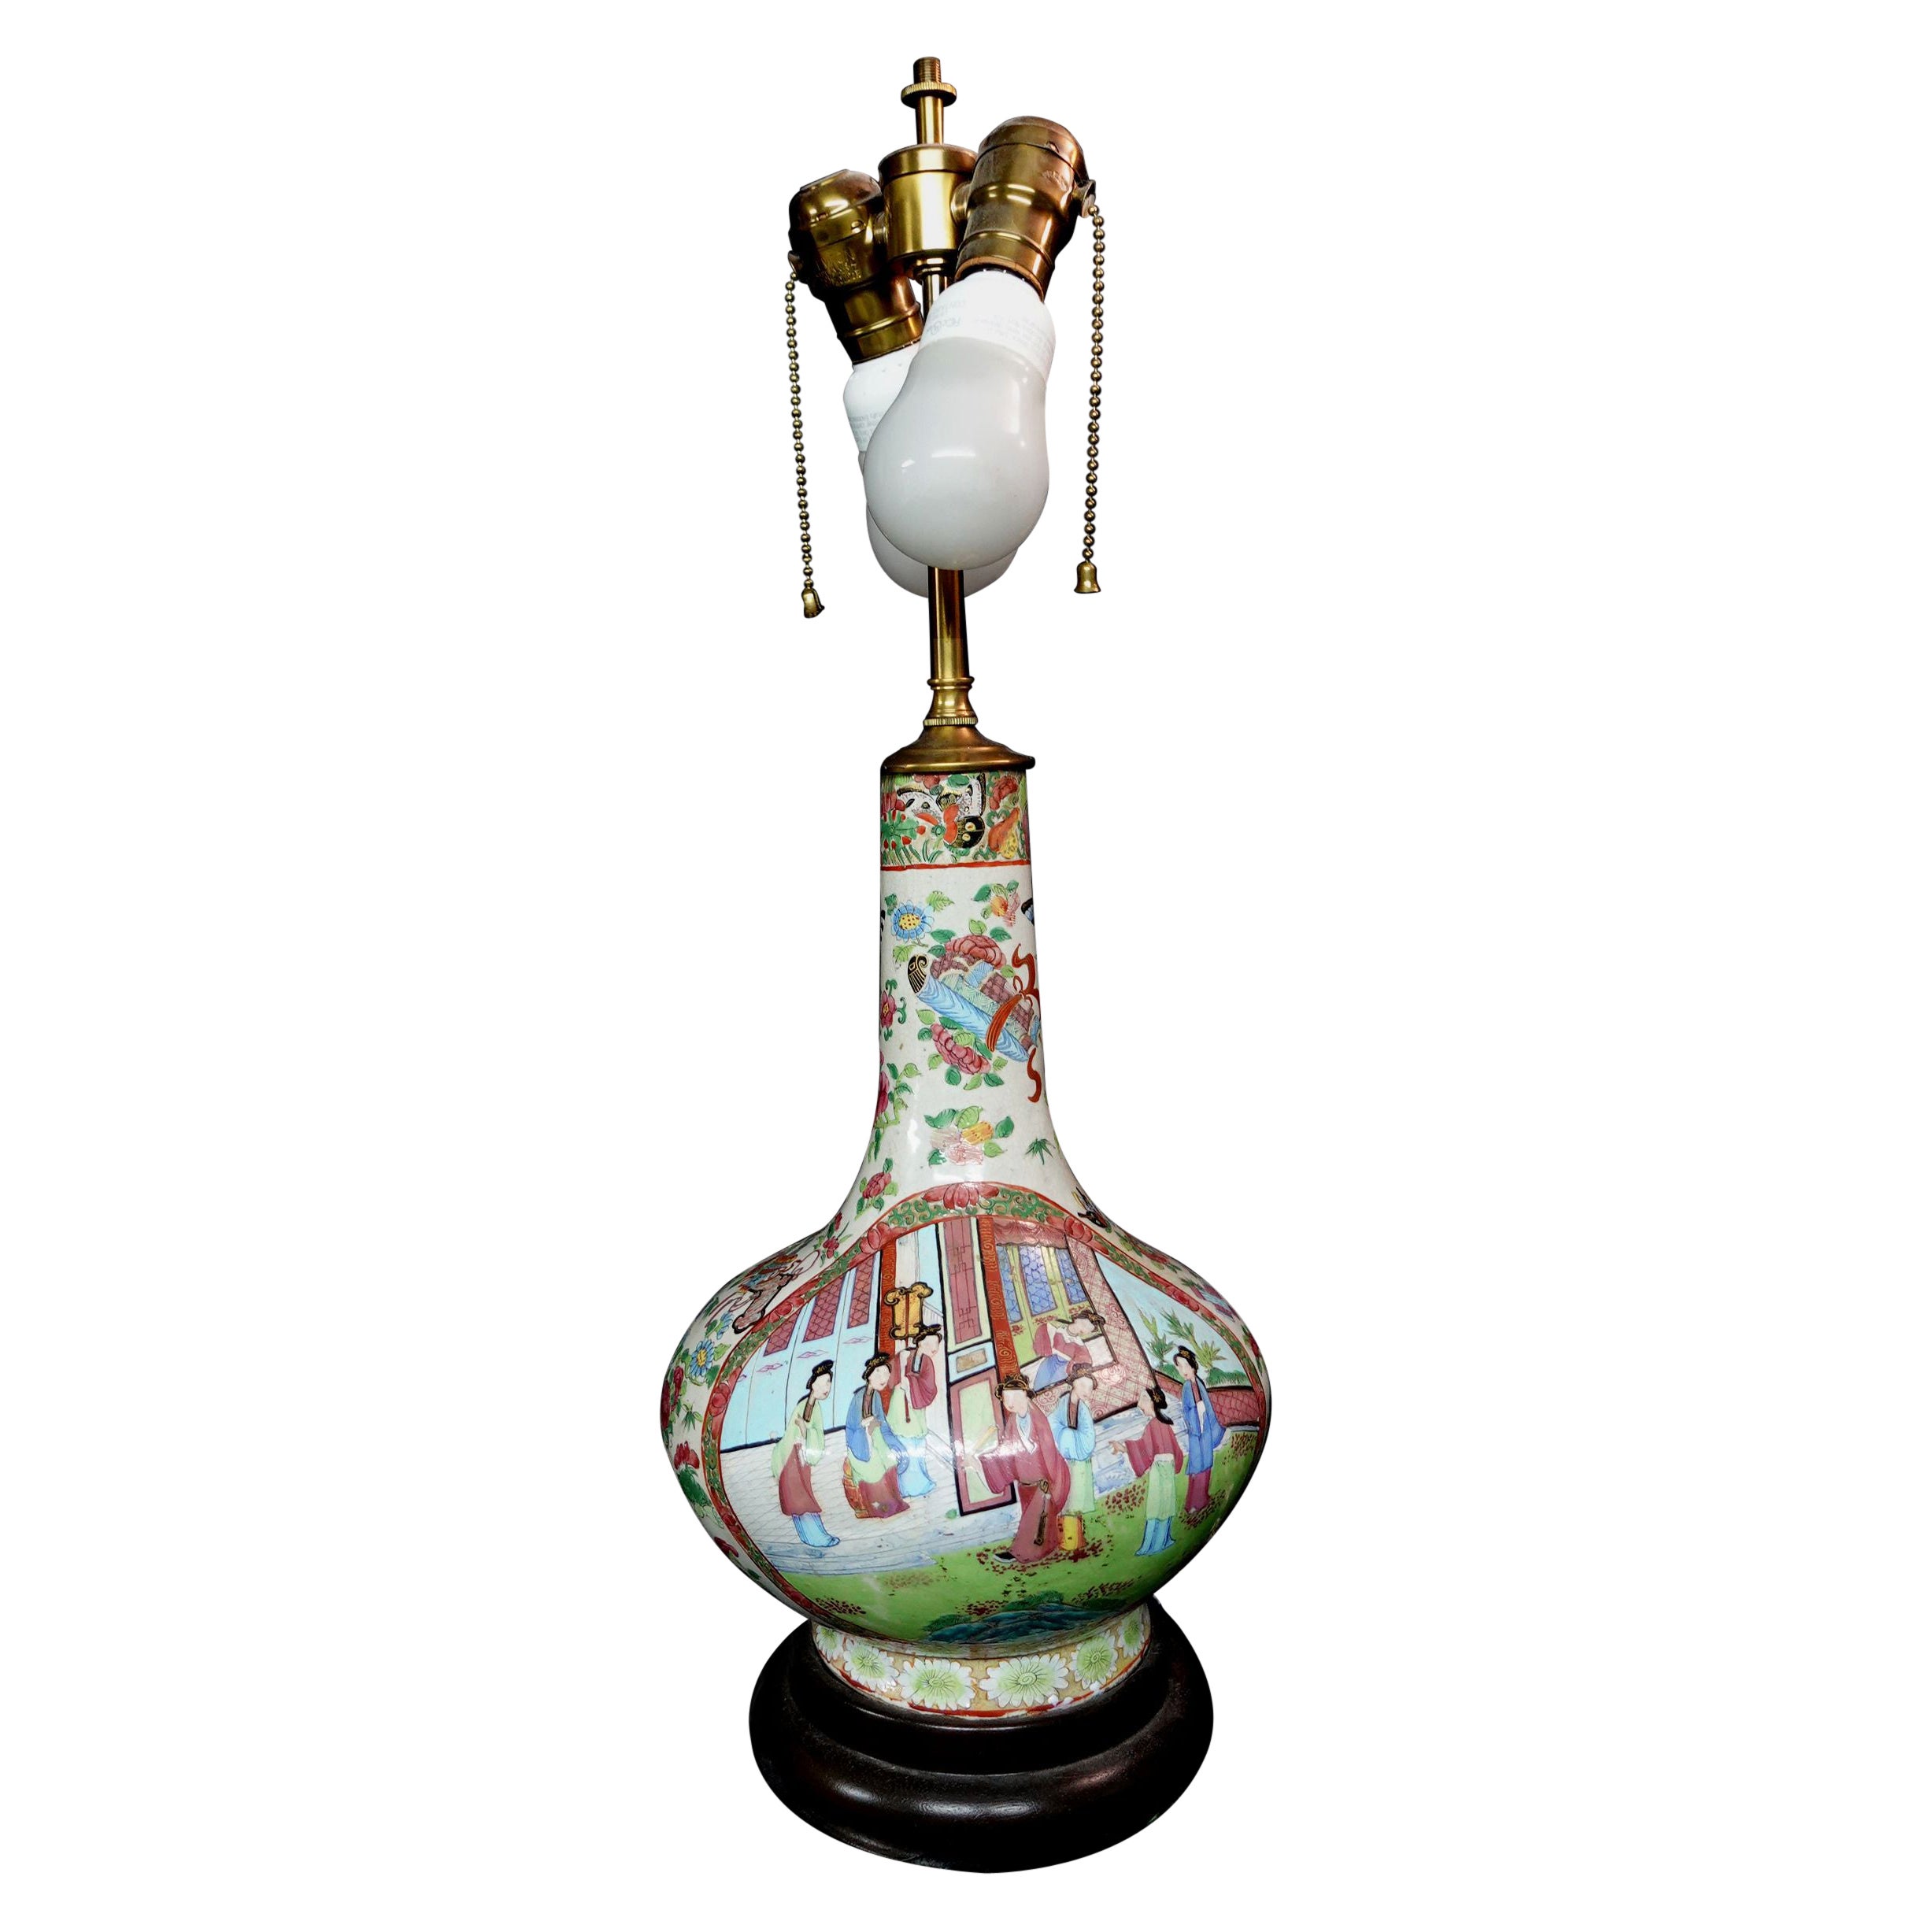 Famille Rose Export Porcelain Water Bottle Lamp Early 19th Century For Sale